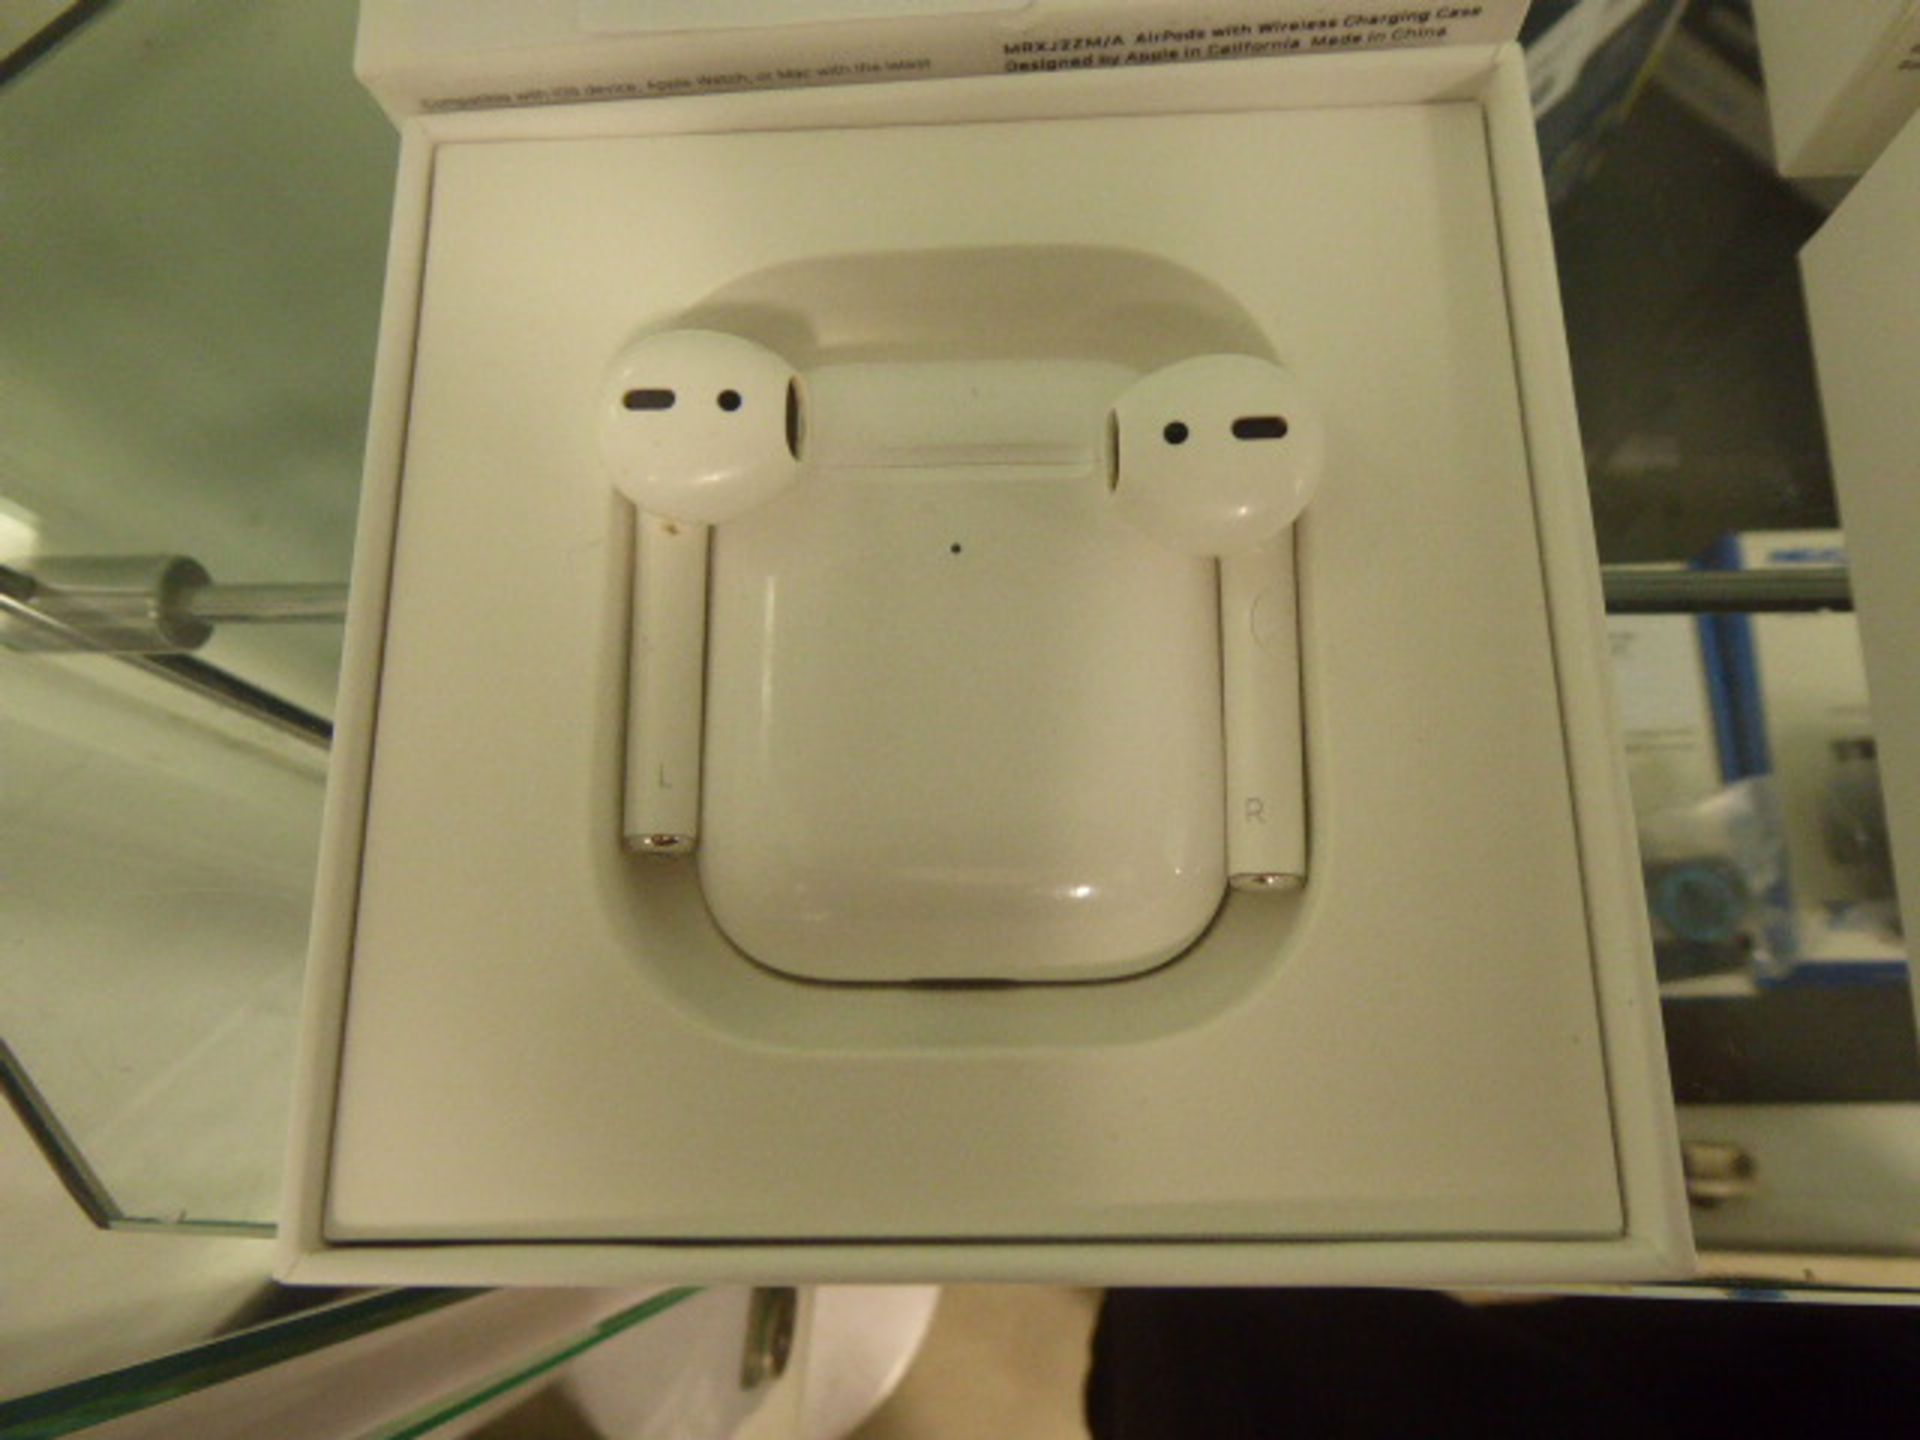 Apple AirPods with wireless charging case and box - Image 2 of 2